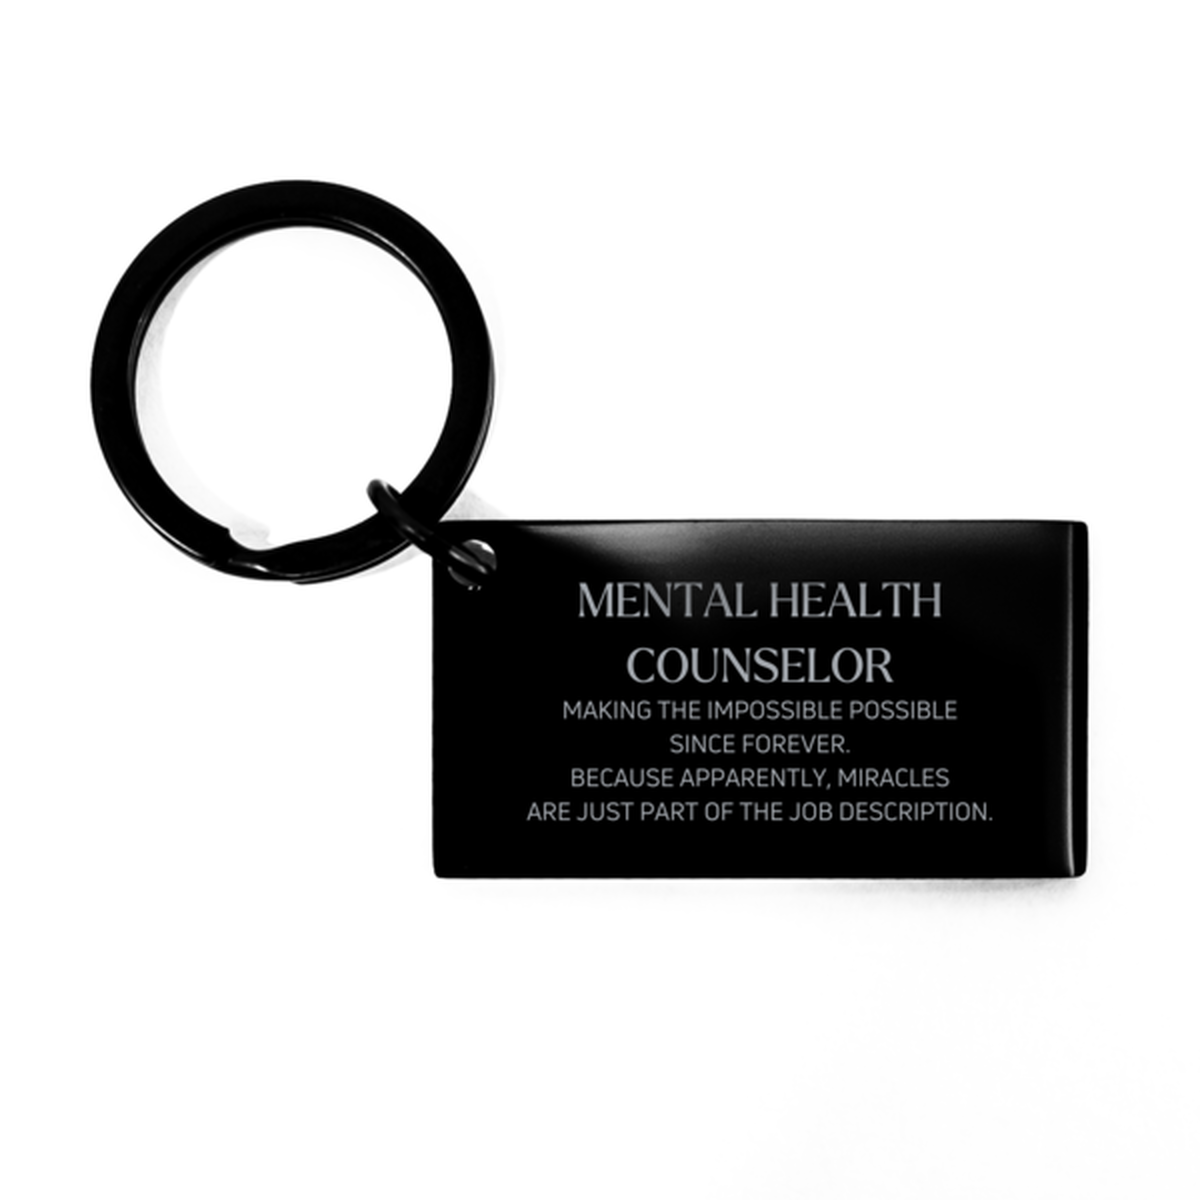 Funny Mental Health Counselor Gifts, Miracles are just part of the job description, Inspirational Birthday Keychain For Mental Health Counselor, Men, Women, Coworkers, Friends, Boss